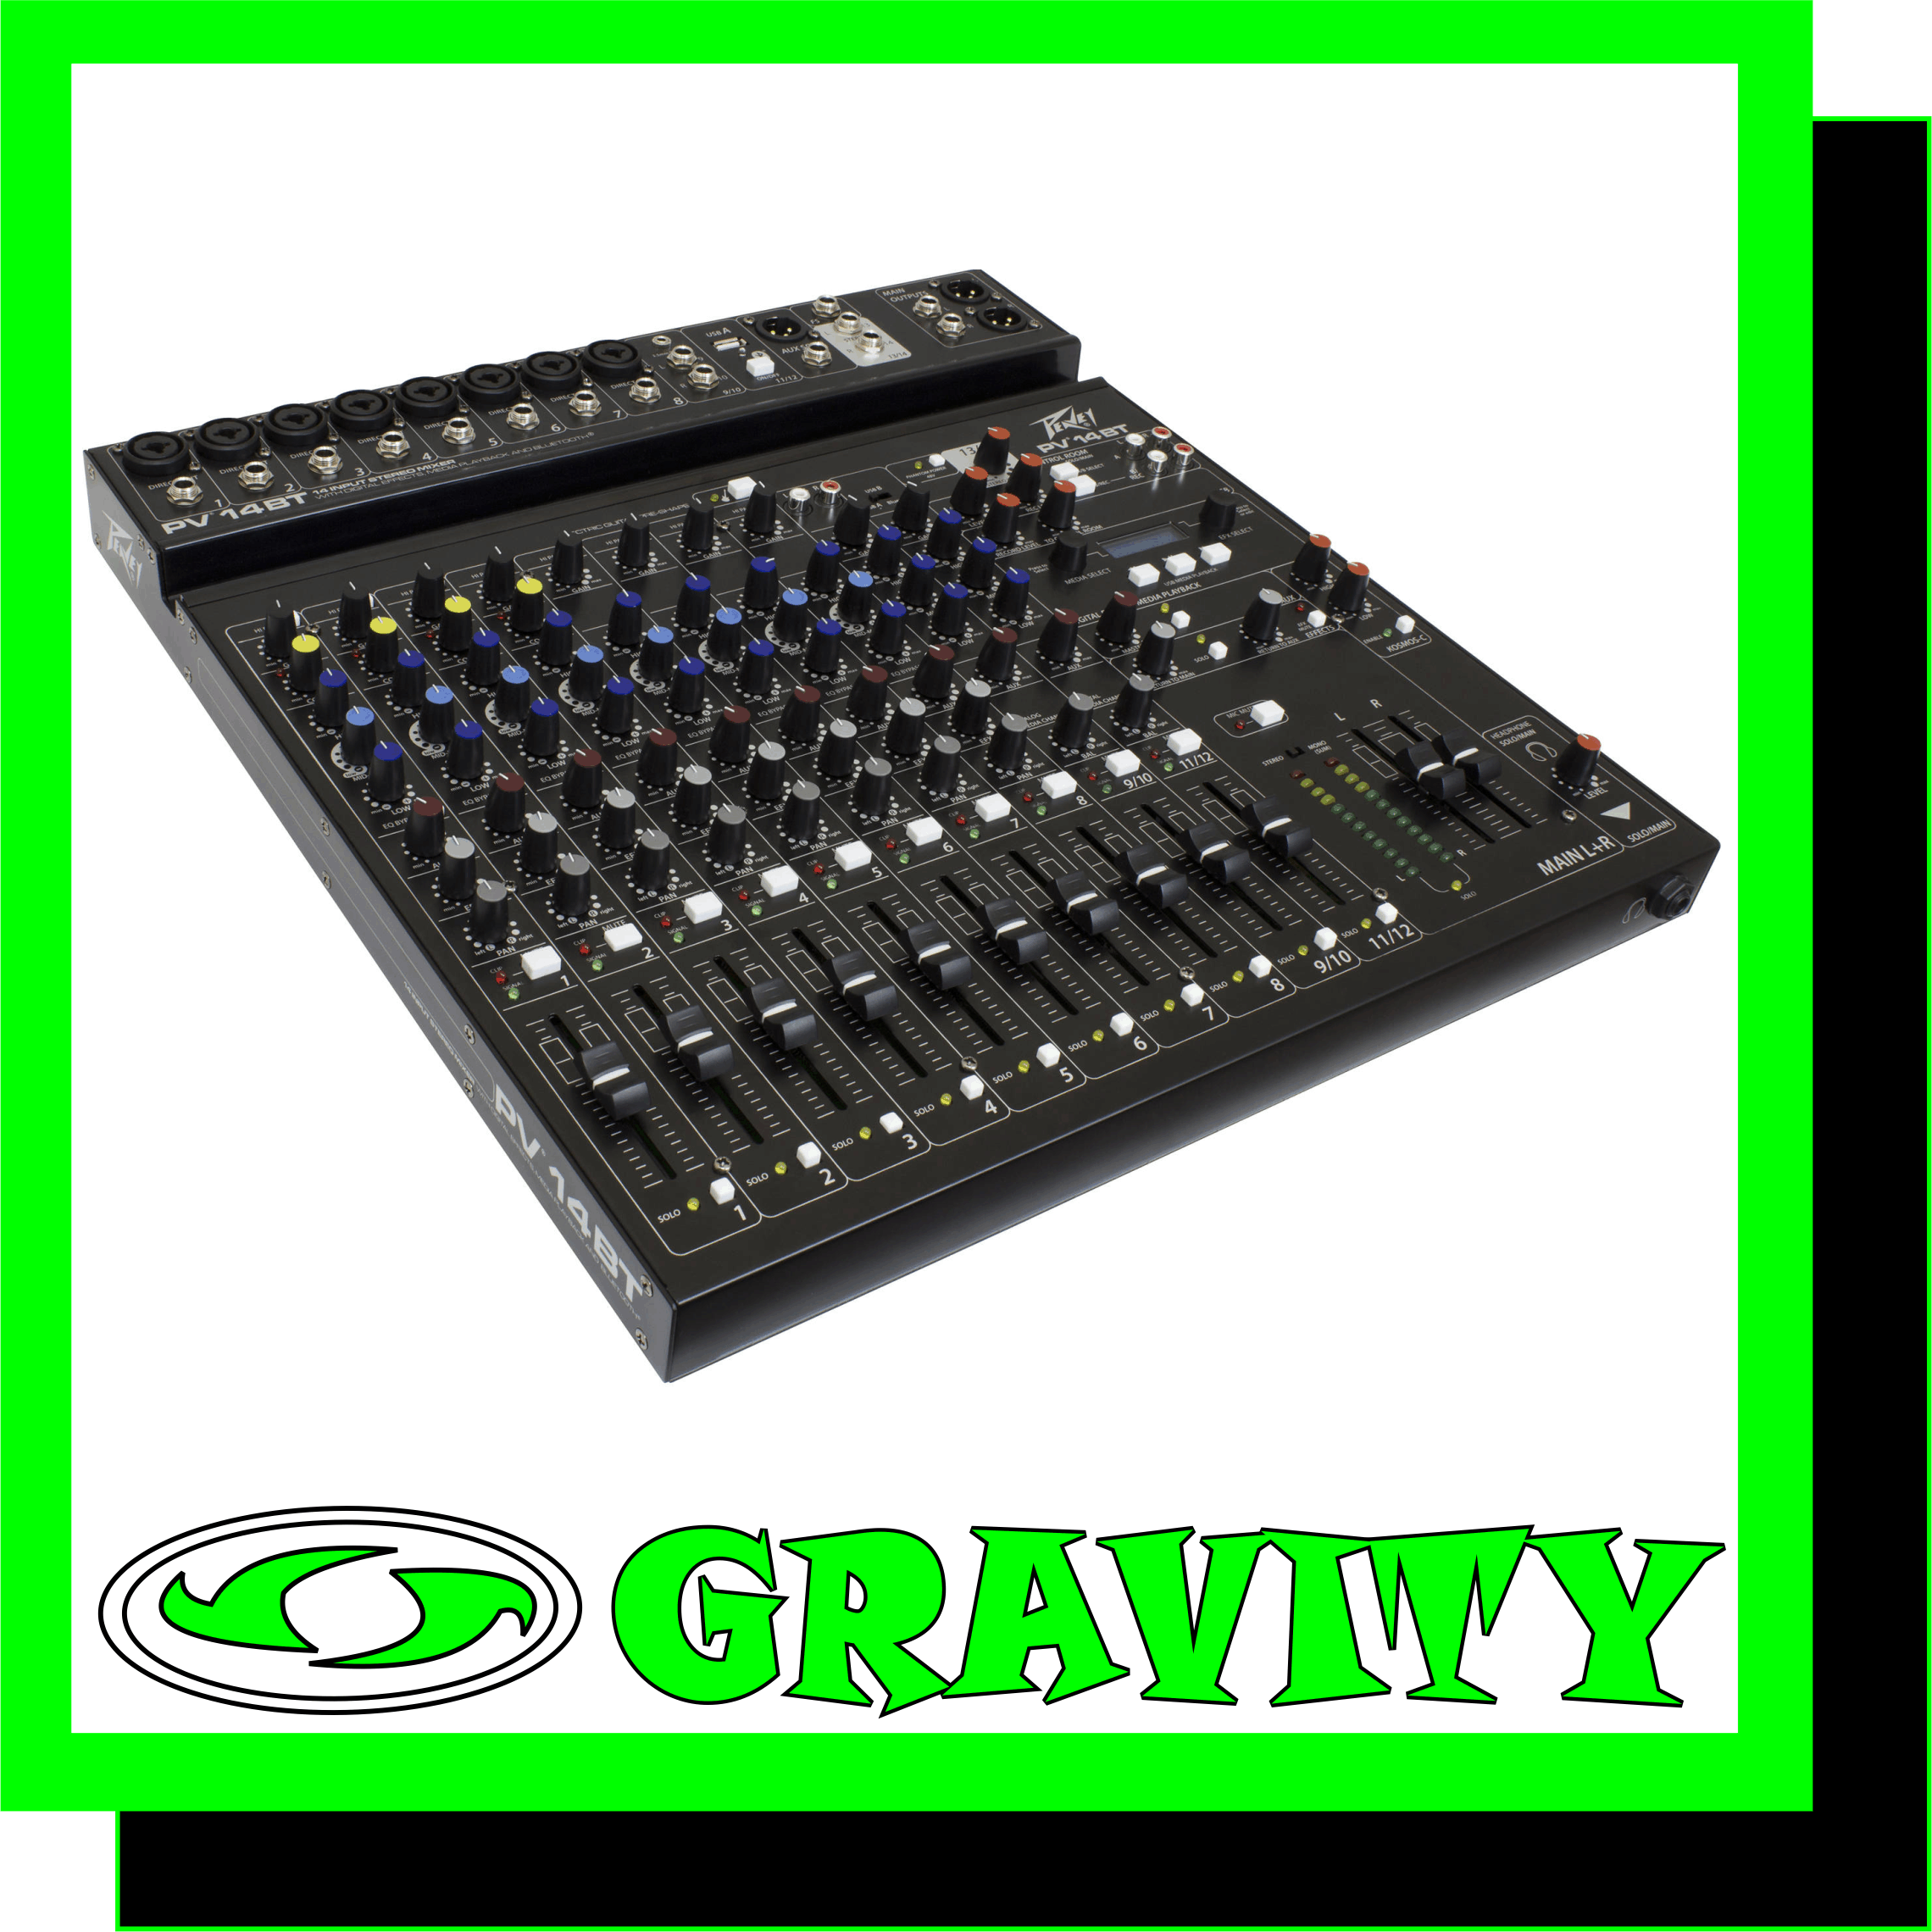 PV® 14 BT  Features: -New rugged, slim, low-profile console design -Convenient tablet cradle -8 combination XLR/1/4" low noise mic preamps -Selectable Hi Pass Filter on first 8 inputs -3-band EQ on all channels -8 channels of Peavey's exclusive MidMorph® EQ -EQ bypass per channel -4 channels of built-in compression -Individual channel mutes -Individual Listen/Solo function -LED clip and signal present indication -8 Channels of direct out -Stereo pan control per channel -Channel 9/10 stereo 1/4", RCA, or 3.5mm input channel -Dual selectable control room outputs -One pre-fader AUX send -KOSMOS® bass and treble enhancement -Main stereo outputs with 1/4" unbalanced and balanced XLR connectors -Precision 60 mm faders -High quality master LED meter bridge -Master mic mute -Studio quality headphone output -Equipped with Bluetooth wireless connectivity, Bluetooth 3.0 + EDR, A2DP -On-board USB-A MP3 and WAV playback -Stereo USB-B streaming audio in and out, 16-bit, up to 48kHz sample rates -Built-in Digital Effects with LCD Display -Peavey's exclusive on-board Hi Z guitar input -Global 48V phantom power -Product Dimensions: 16.1875" wide x 17.3" deep x 2.1875" high (41.12 cm x 43.94 cm x 5.56 cm) -Weight Packed: 13.23 lb(6 kg) -Width Packed: 18.7"(47.498 cm) -Height Packed: 20.47"(51.9938 cm) -Depth Packed: 3.54"(8.9916 cm)  Overview: Introducing the next level in world-class non-powered mixer performance. The all new PV® series mixing consoles include Peavey's reference-quality mic preamps that spec in at an incredible 0.0007% THD, making the PV series mixers excellent for live or recording applications.  The PV 14 BT includes 8 channels of reference quality mic preamps, 8 direct outputs for recording, a stereo channel, media channel with Bluetooth® wireless input, high quality digital effects with LCD display, streaming USB out, MP3 playback via USB A input, Peavey's exclusive Kosmos® audio enhancement, 48-volt phantom power, dual selectable control room outputs, 4 channels of compression, one channel of on board selectable guitar preamp, 3-band EQ per channel with bypass, channel mute buttons, aux send, signal clip indicators, and a stereo master LED meter bridge. This amazingly versatile mixer is at home both in the studio as well as live applications.  Modern features such as Bluetooth allow seamless connection to almost any "smart" device. 8 direct outs allow easy connection to most DAW interfaces for recording. In addition, the PV 14 BT can stream audio directly to a PC. MP3 playback is also available, just plug a flash drive with MP3 files on it into the USB A port and use the LCD to select and play back music. The PV series Solo feature allows the user to listen to individual channels via headphone or control room outputs, and the EQ bypass allows the user to hear and compare the EQ'd signal to the original signal with the push of a button. 4 channels of compression keep signals with difficult levels under control, and Peavey's exclusive guitar shape adjusts the EQ and preamp specifically for guitar. Hi pass filters on every channel remove unwanted rumble and noise, and balanced AUX and Master outputs ensure a clean noise-free signal to your powered speakers or power amplifier.